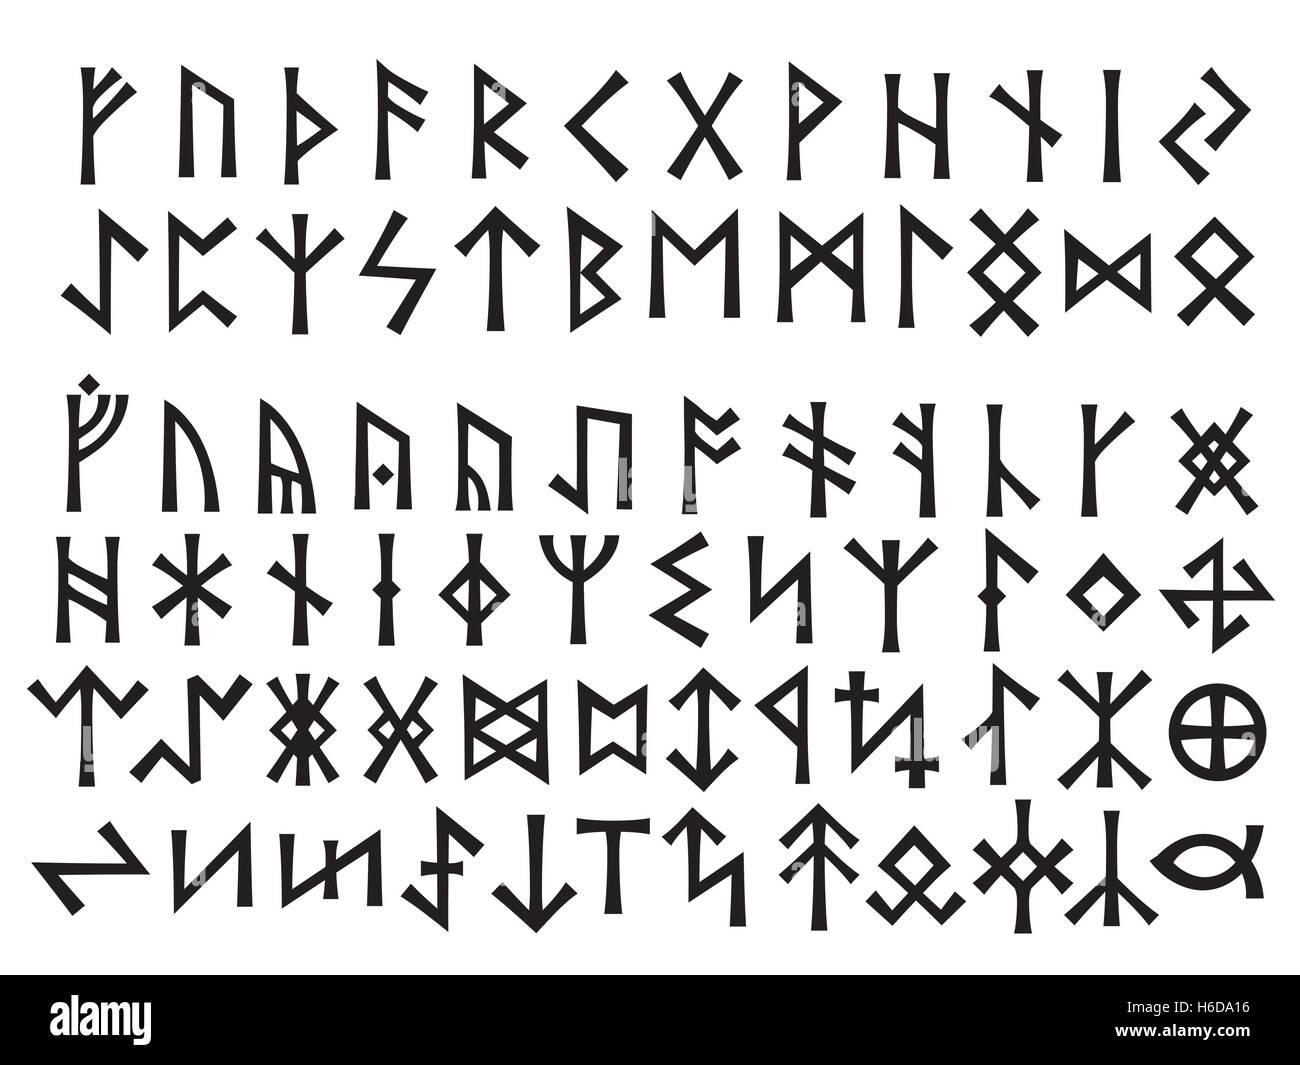 Elder Futhark and Other Runes. Runic script used all over Northern Europe till the XIII century. Stock Vector